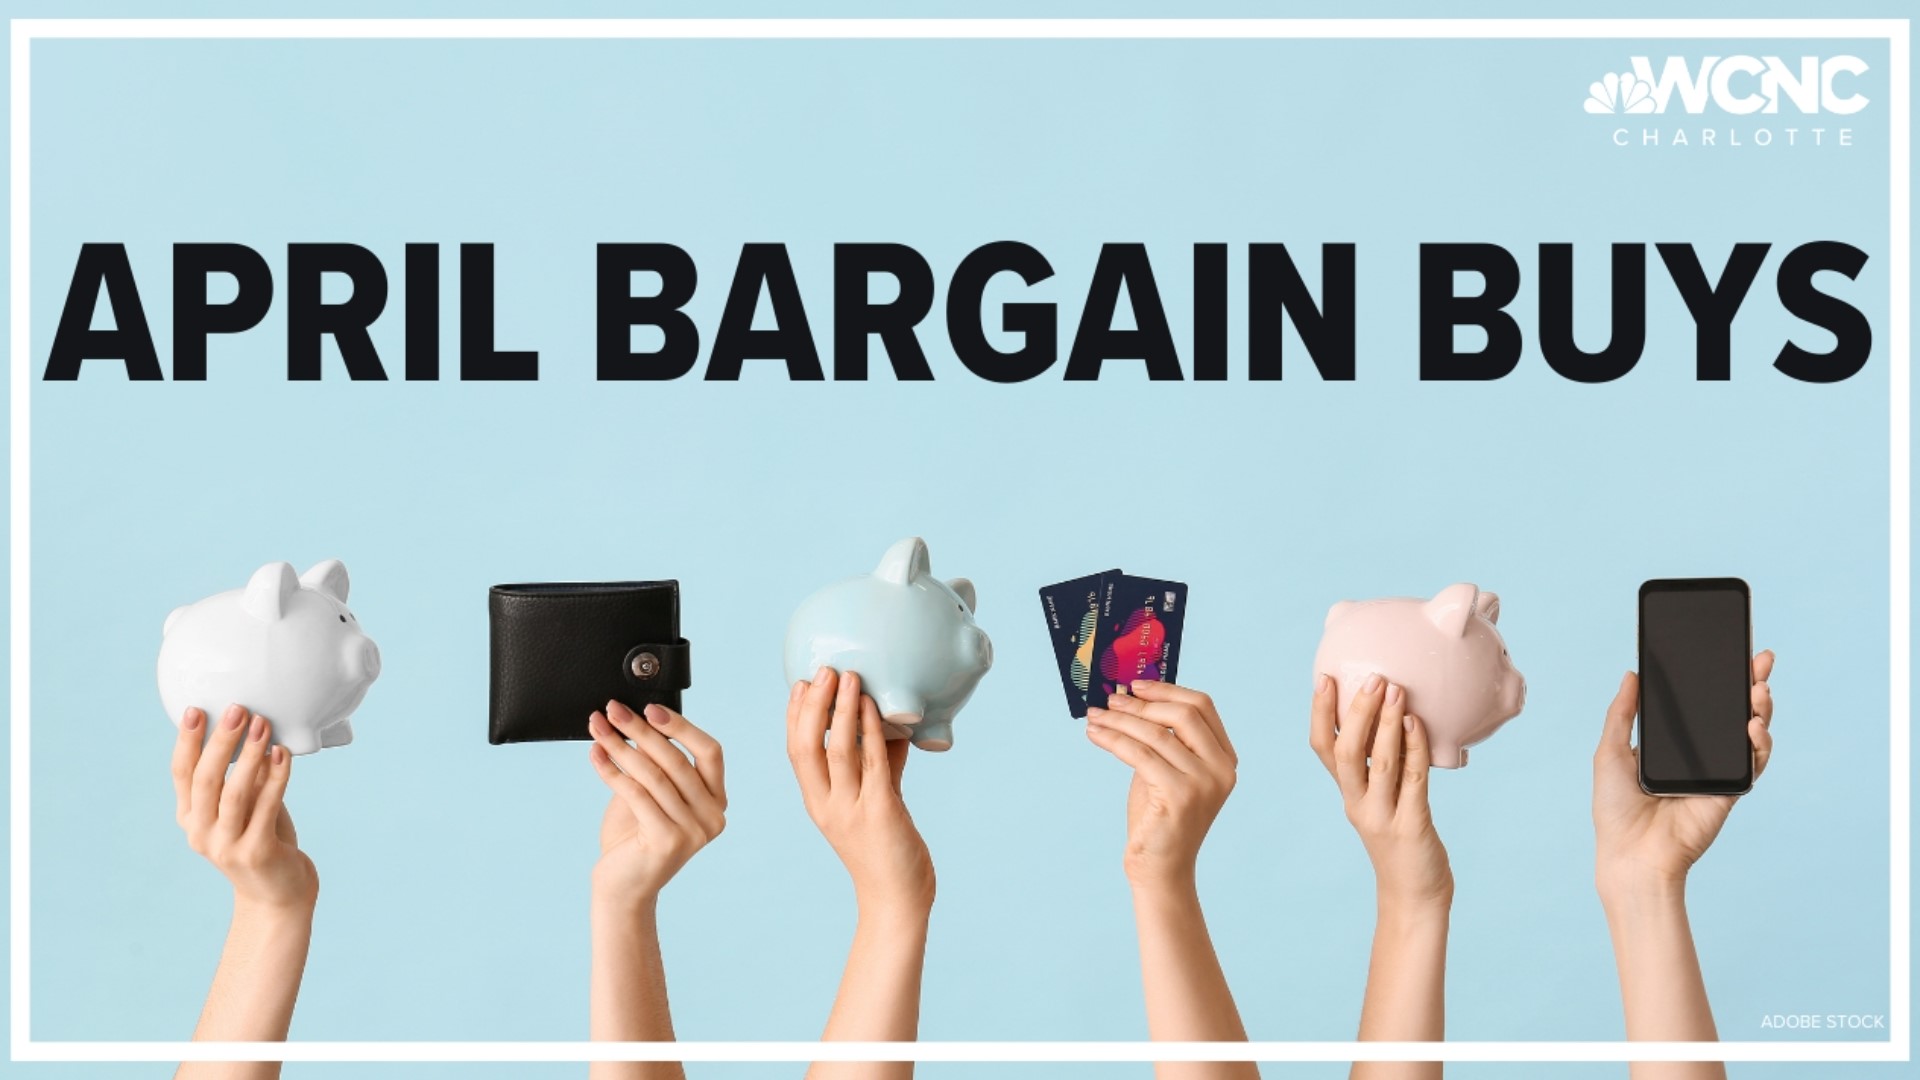 From groceries to gasoline, just about everything is costing more these days. But there are some bargains to be had if you know what to shop for and when.